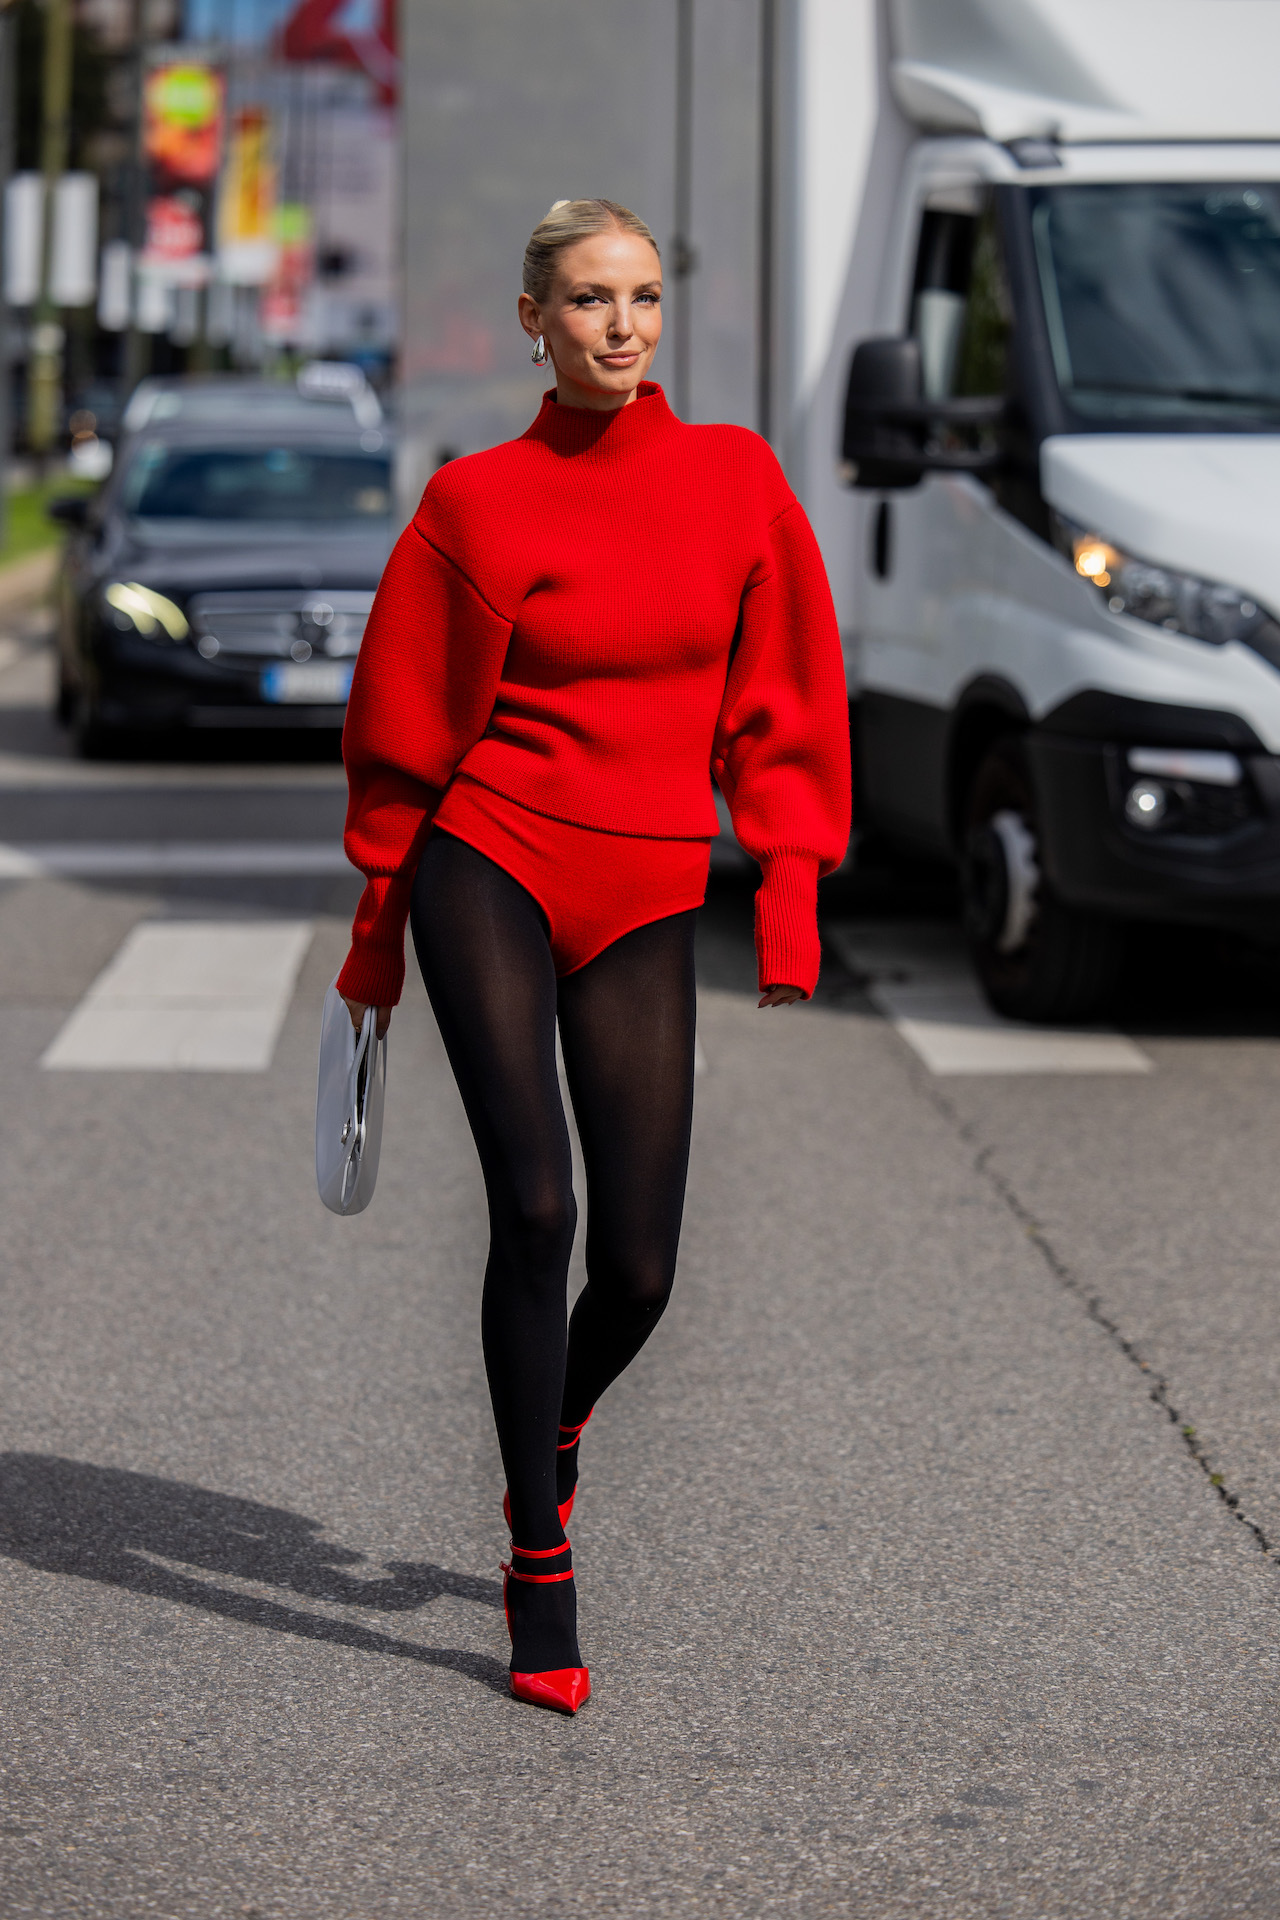 Let's talk fashion trends for fall 2023: BOLD REDS - so sexy